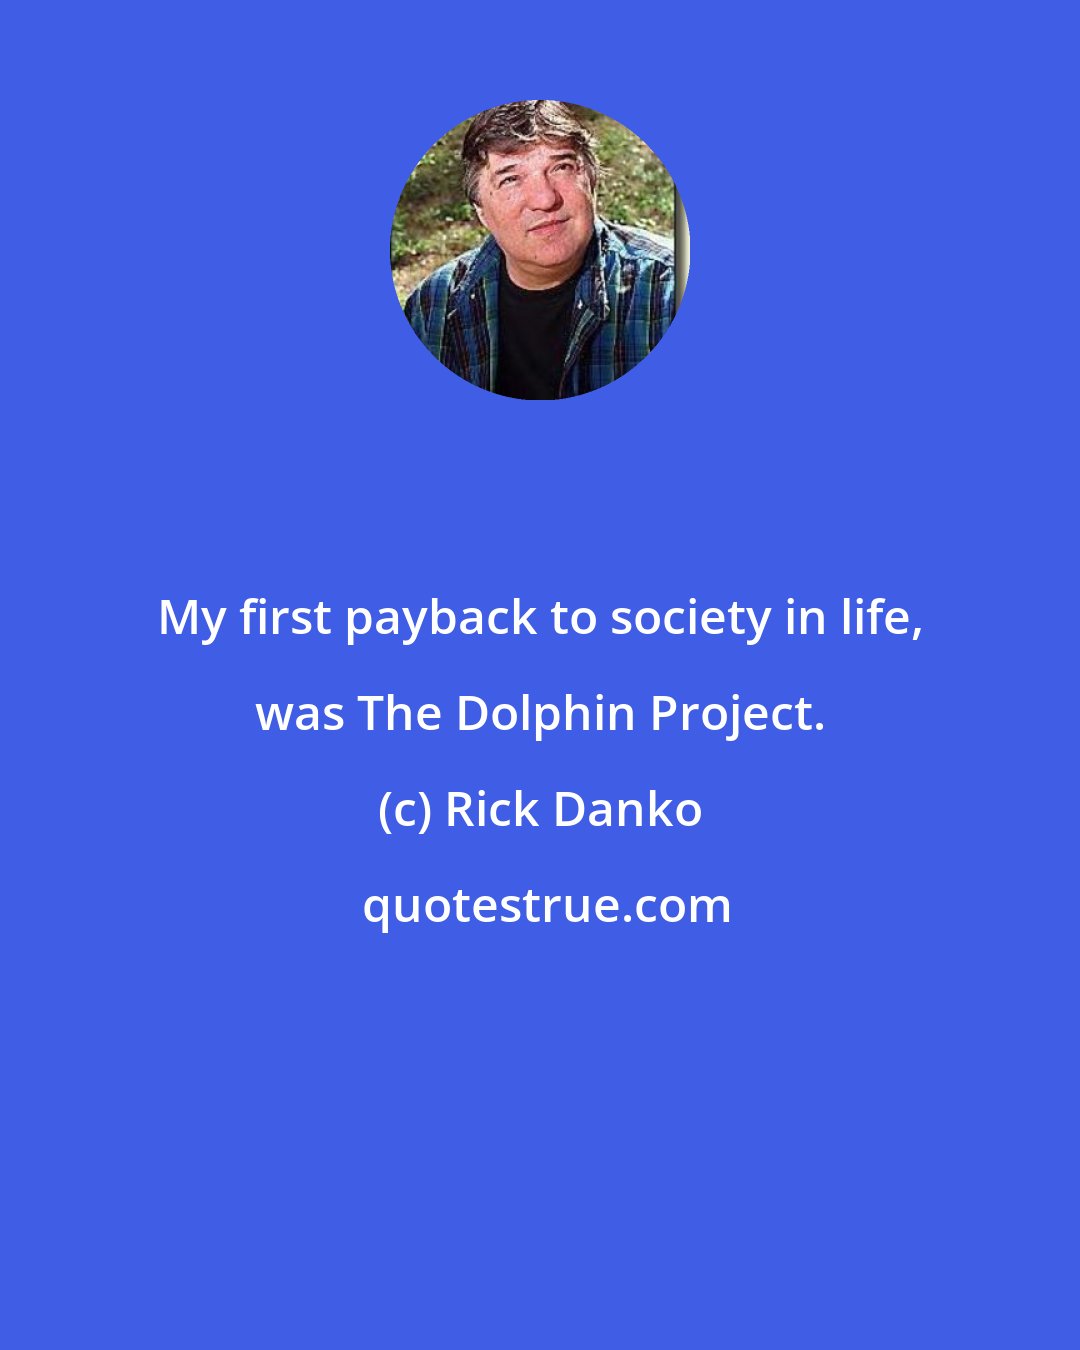 Rick Danko: My first payback to society in life, was The Dolphin Project.